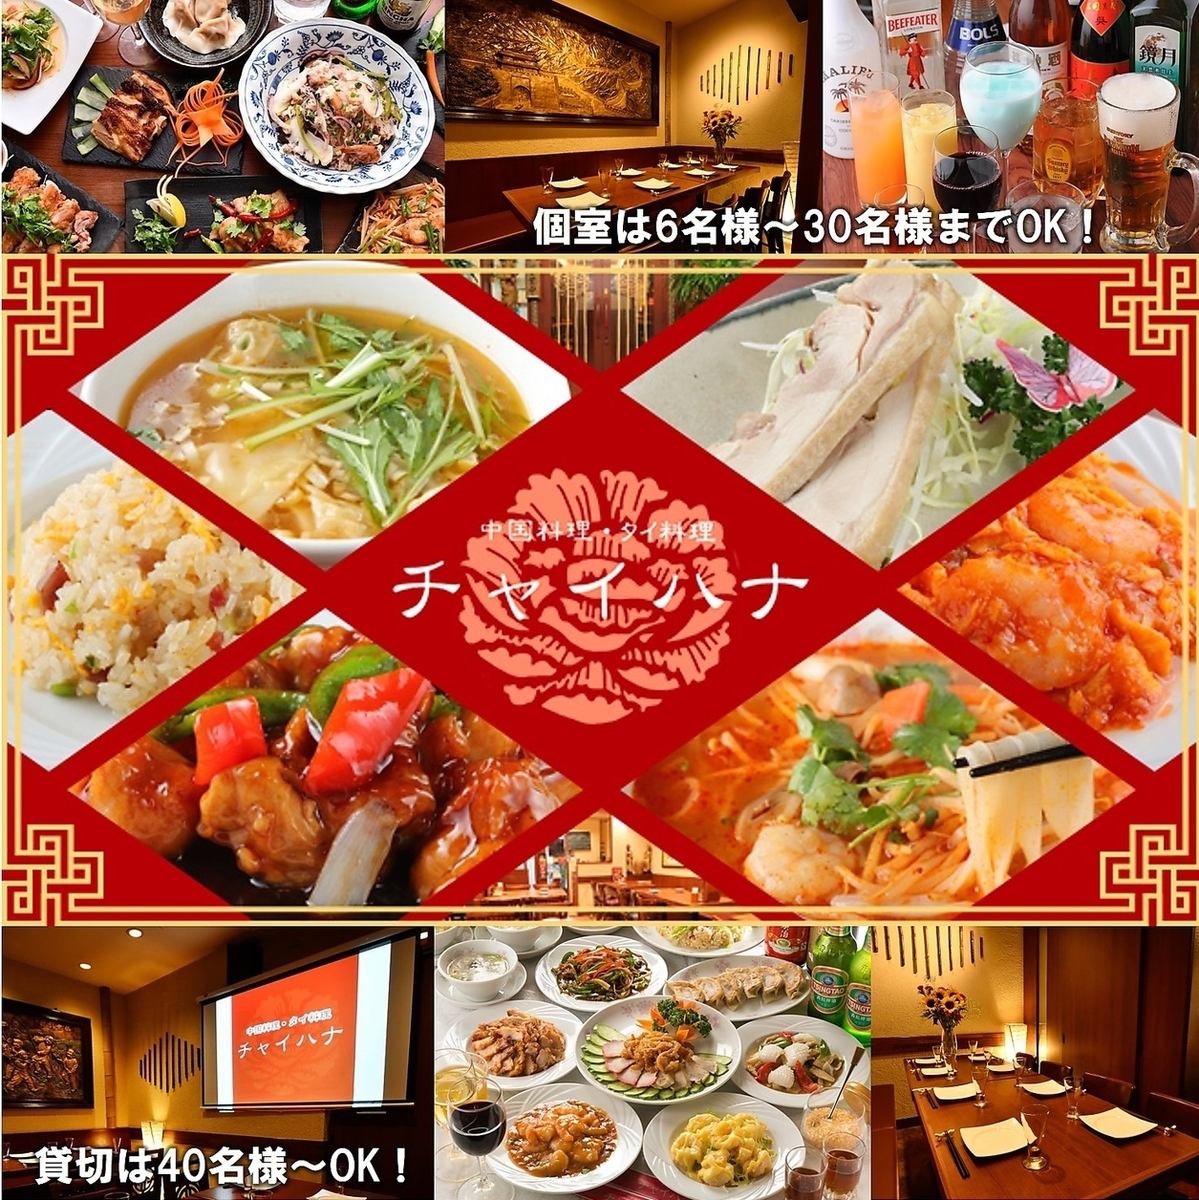 We offer a large number of courses from 1,999 yen where you can enjoy both classic Chinese and Thai dishes!